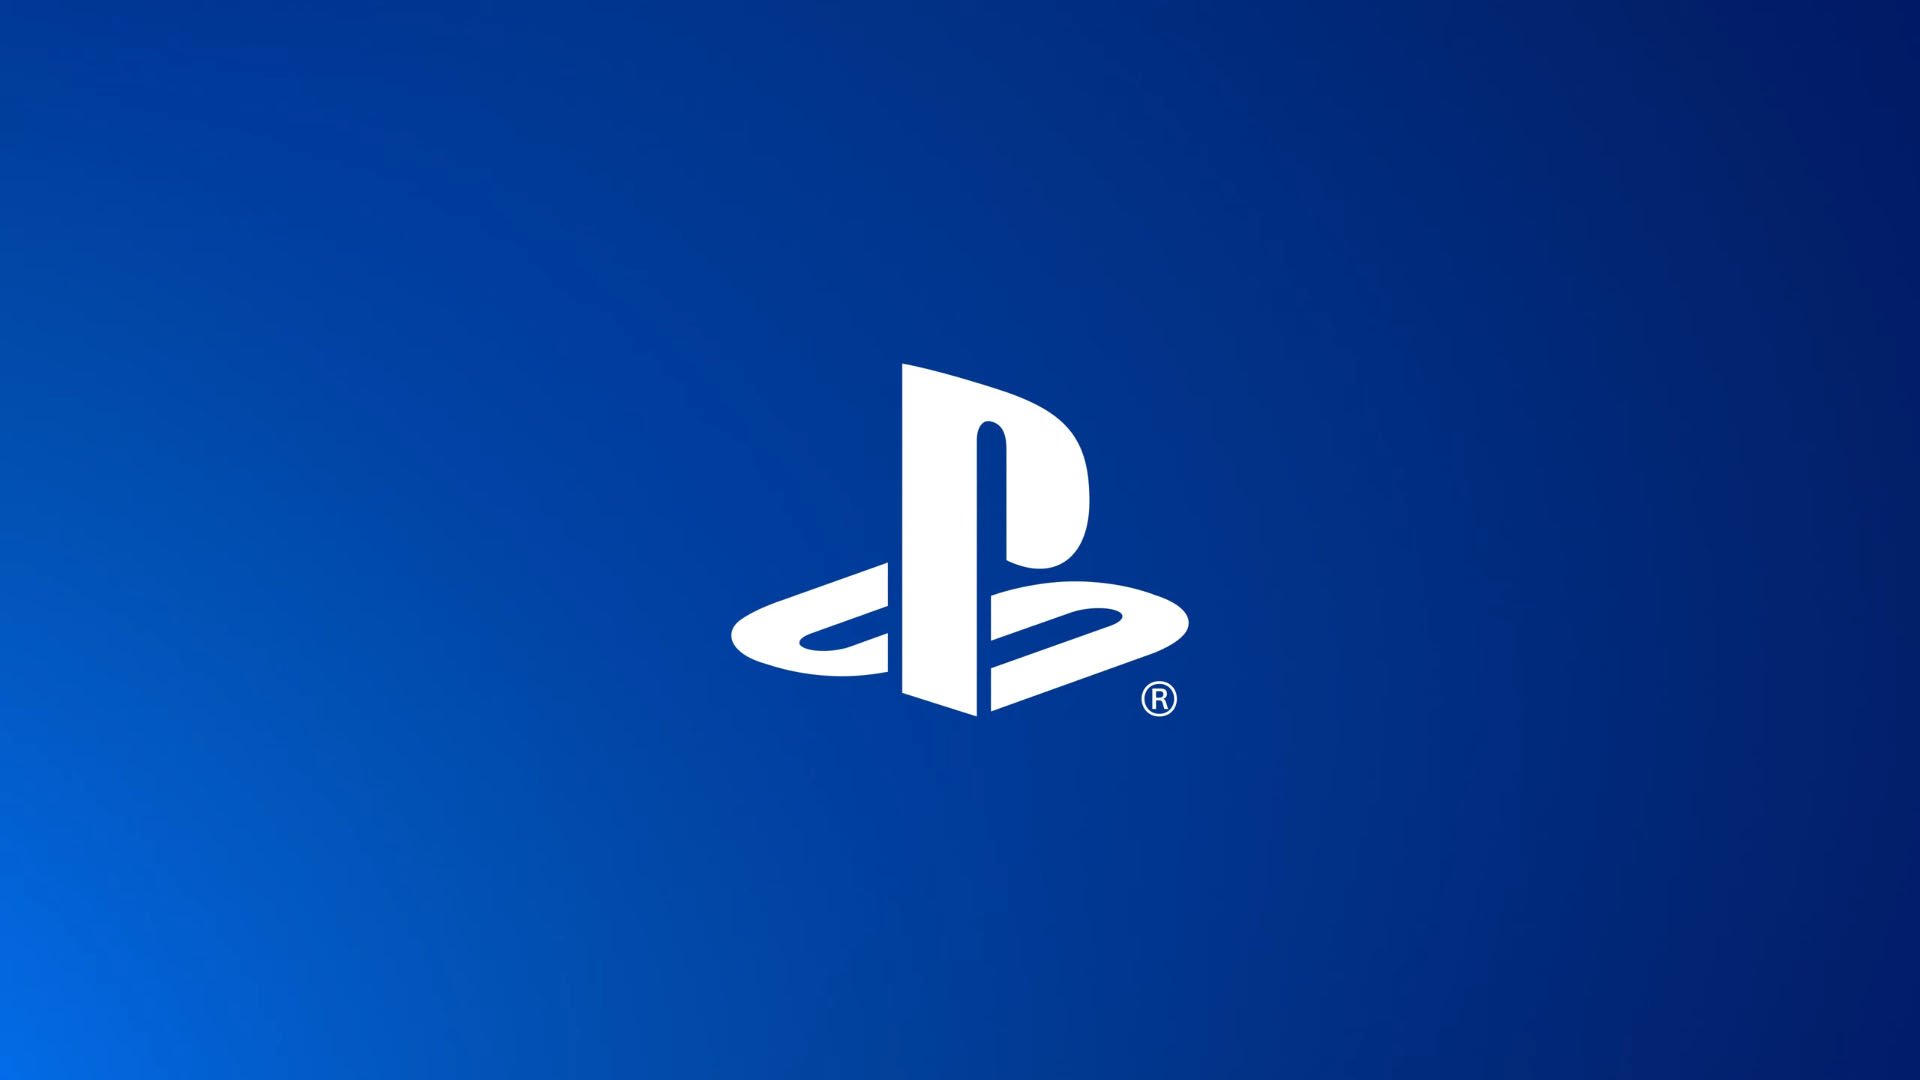 PlayStation State of Play Event Announced For Same Day as Nintendo Direct -  Insider Gaming